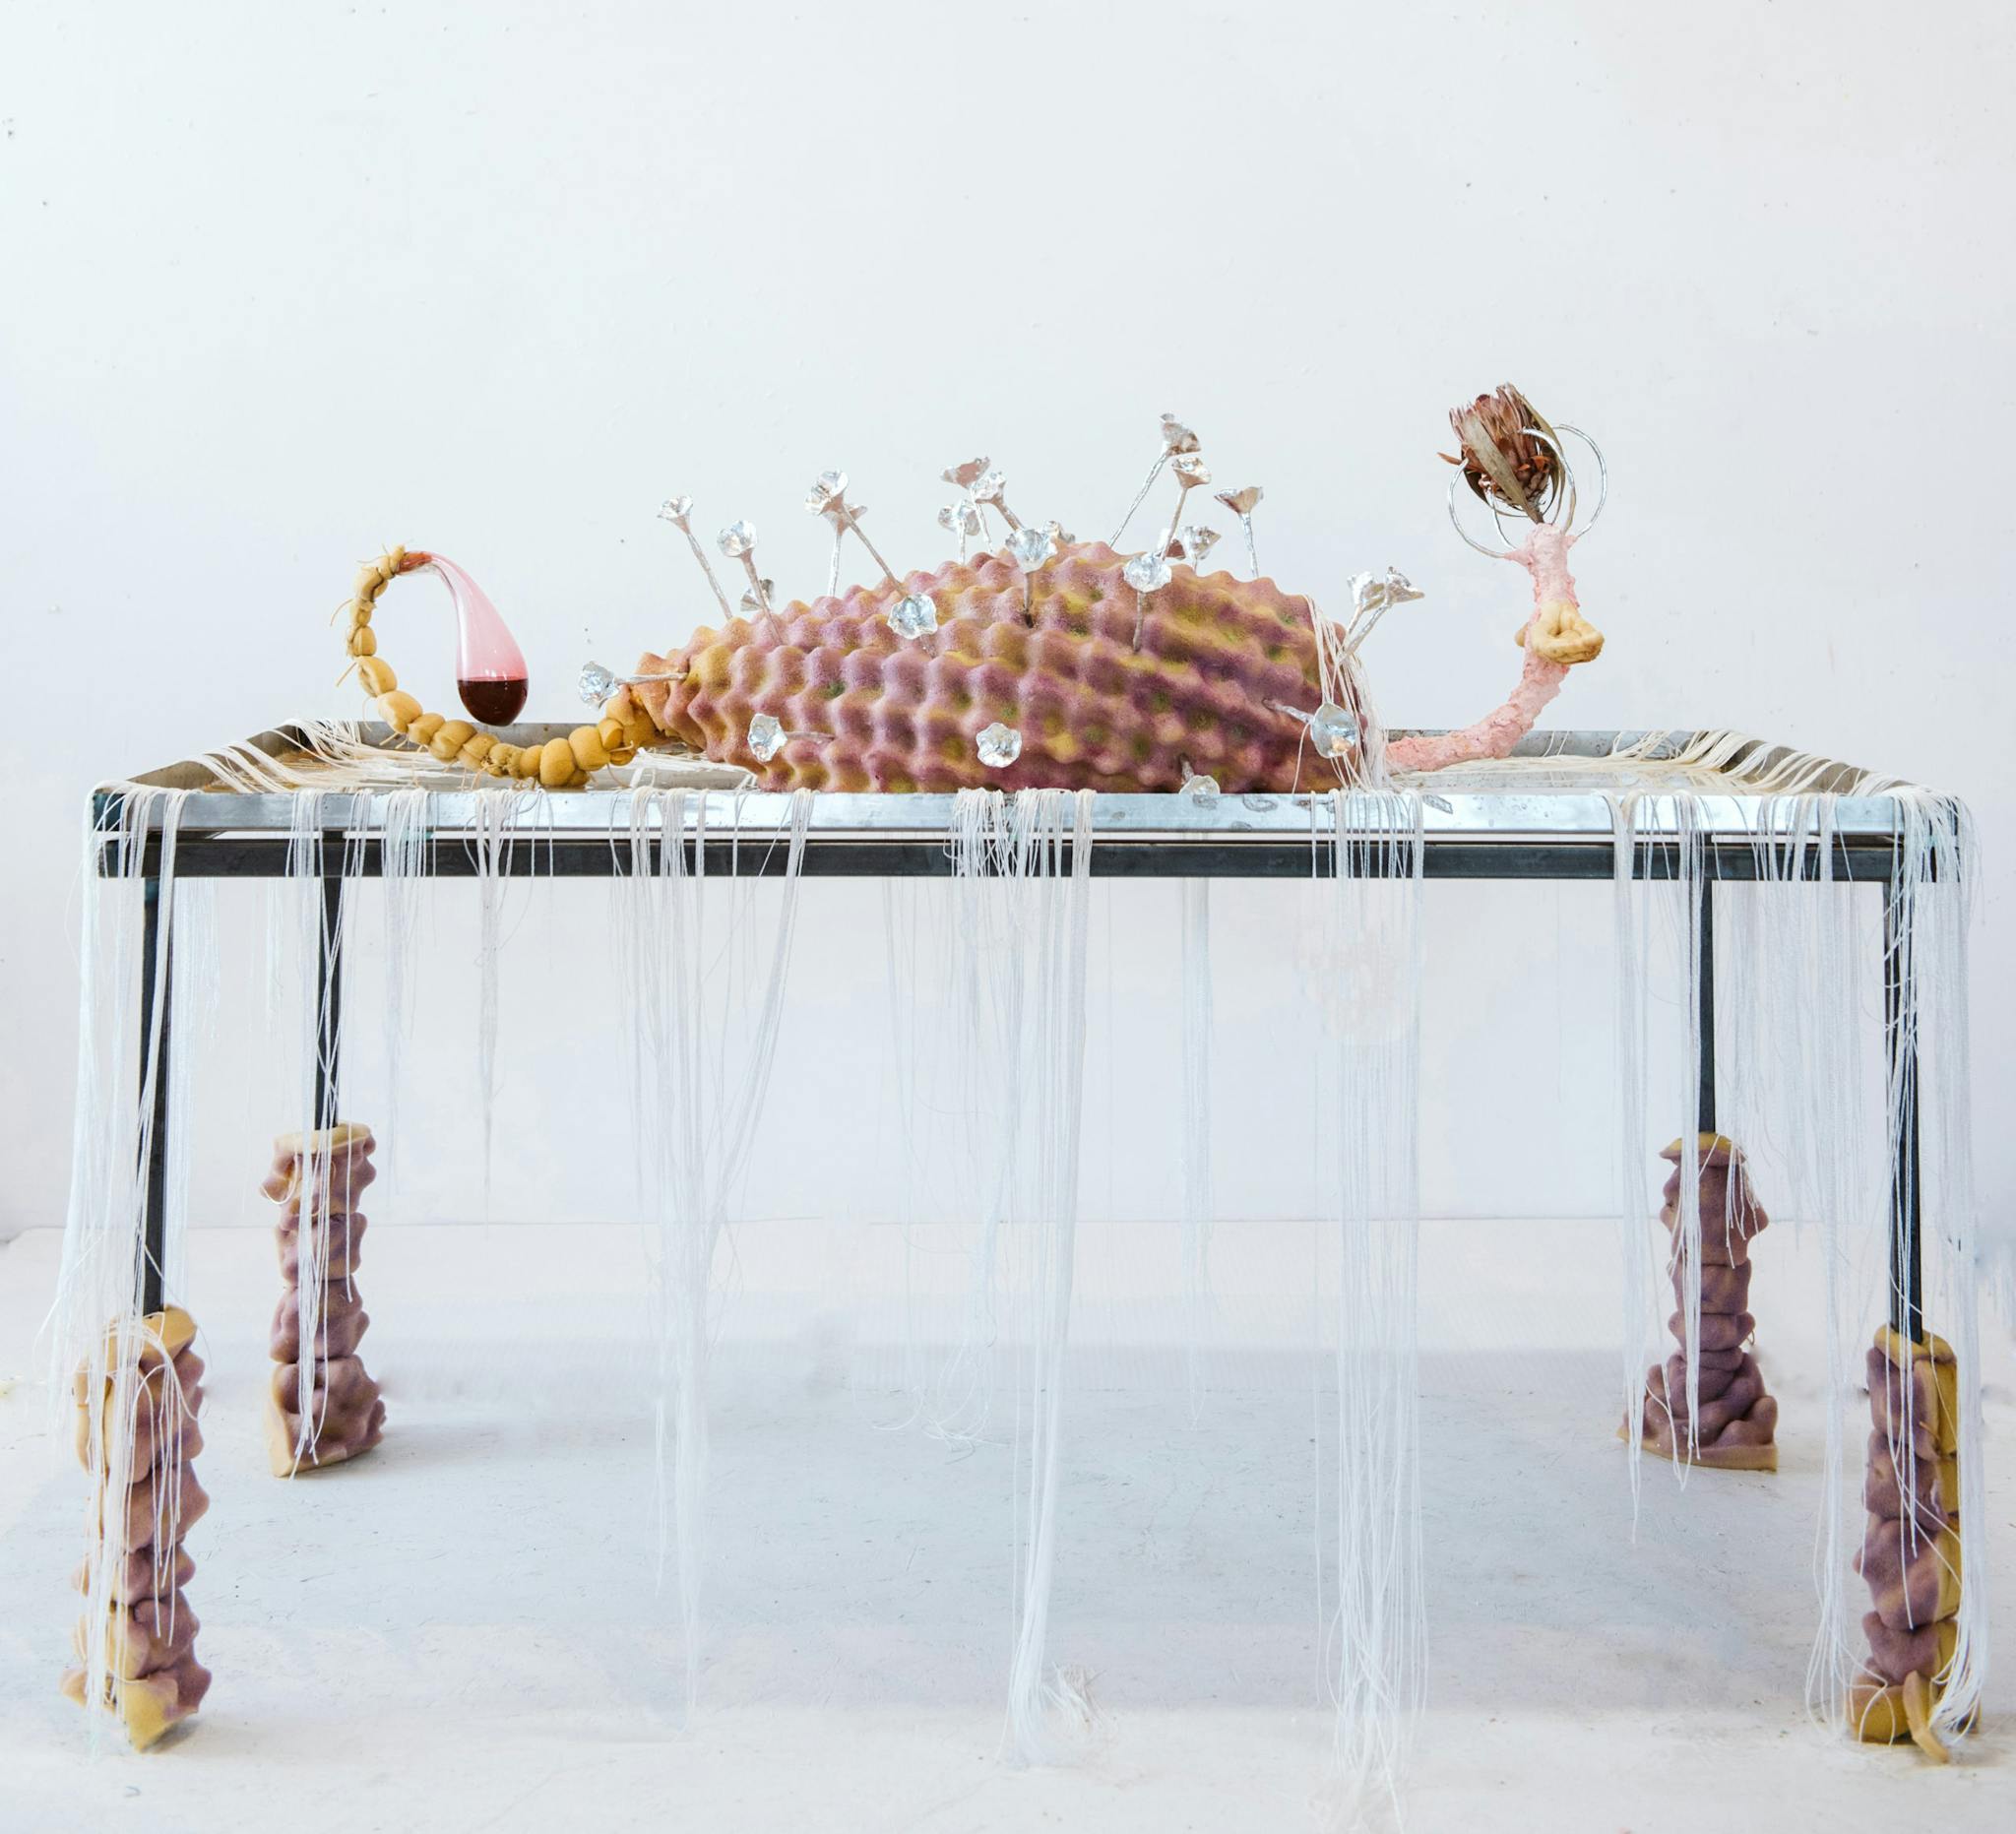 A table with an artistic display by Estefania Puerta on top against a white background.